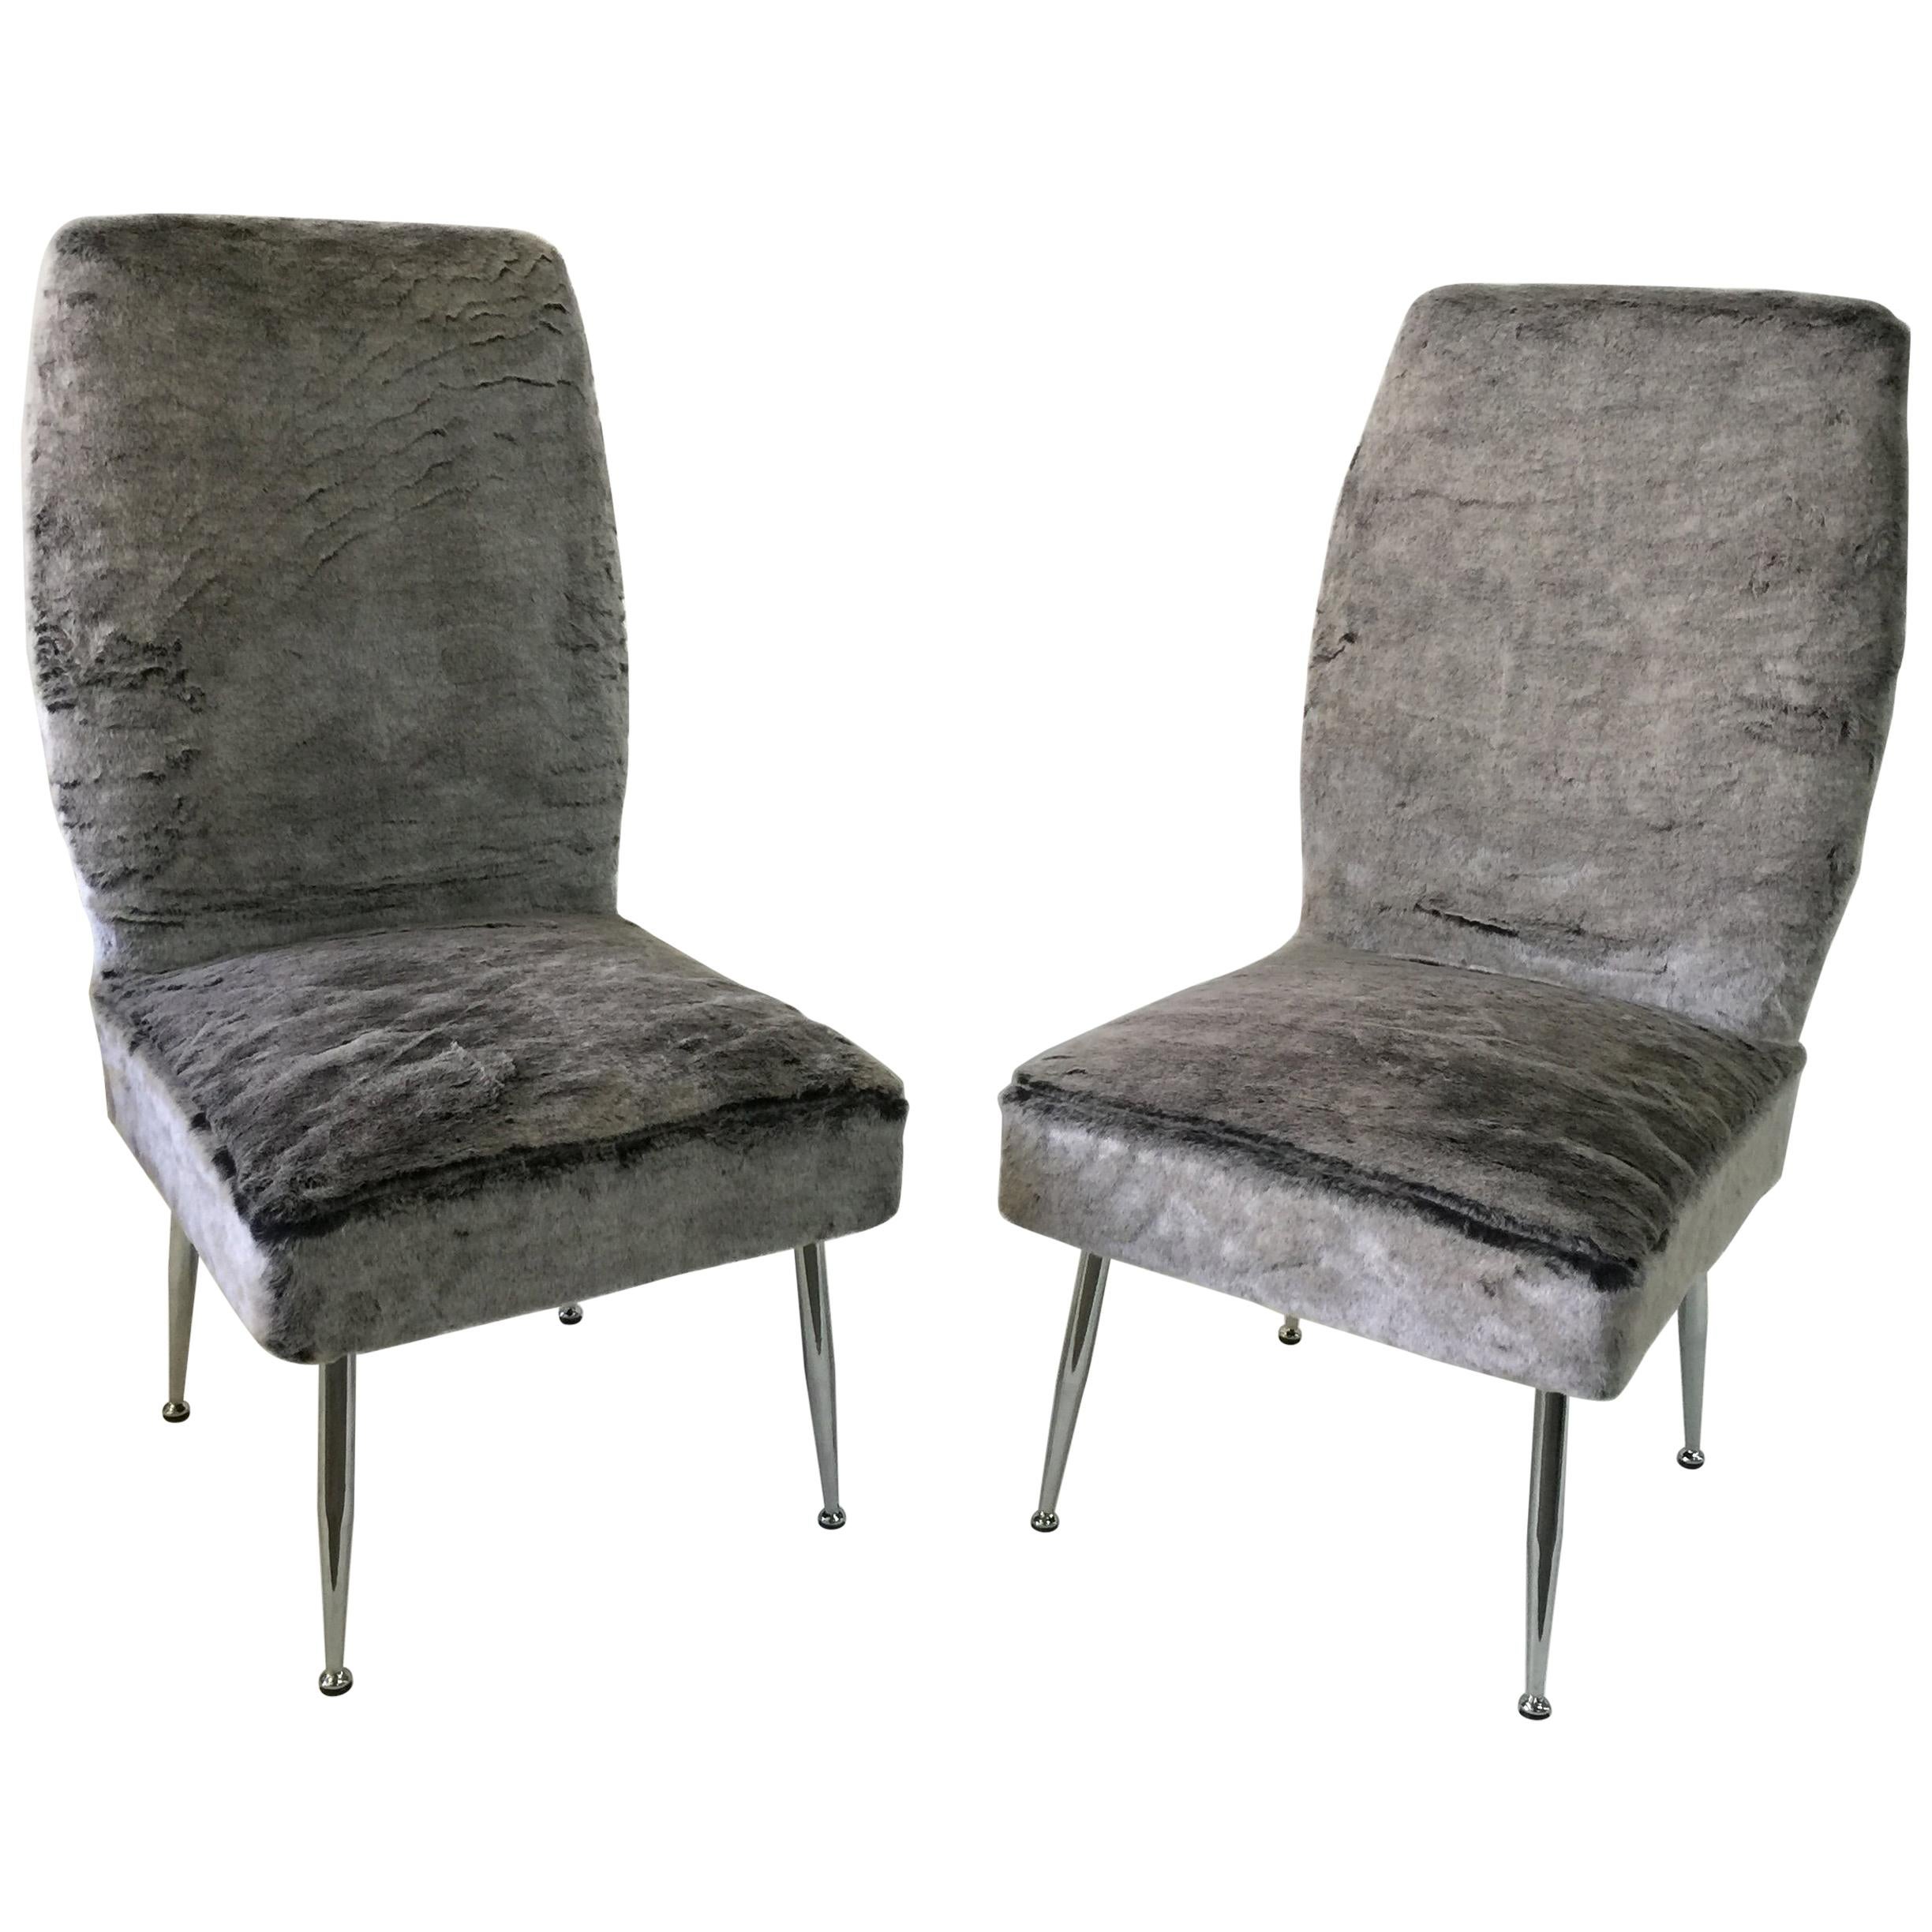 Pair of Vintage Italian Plush Covered Occasional Chairs 